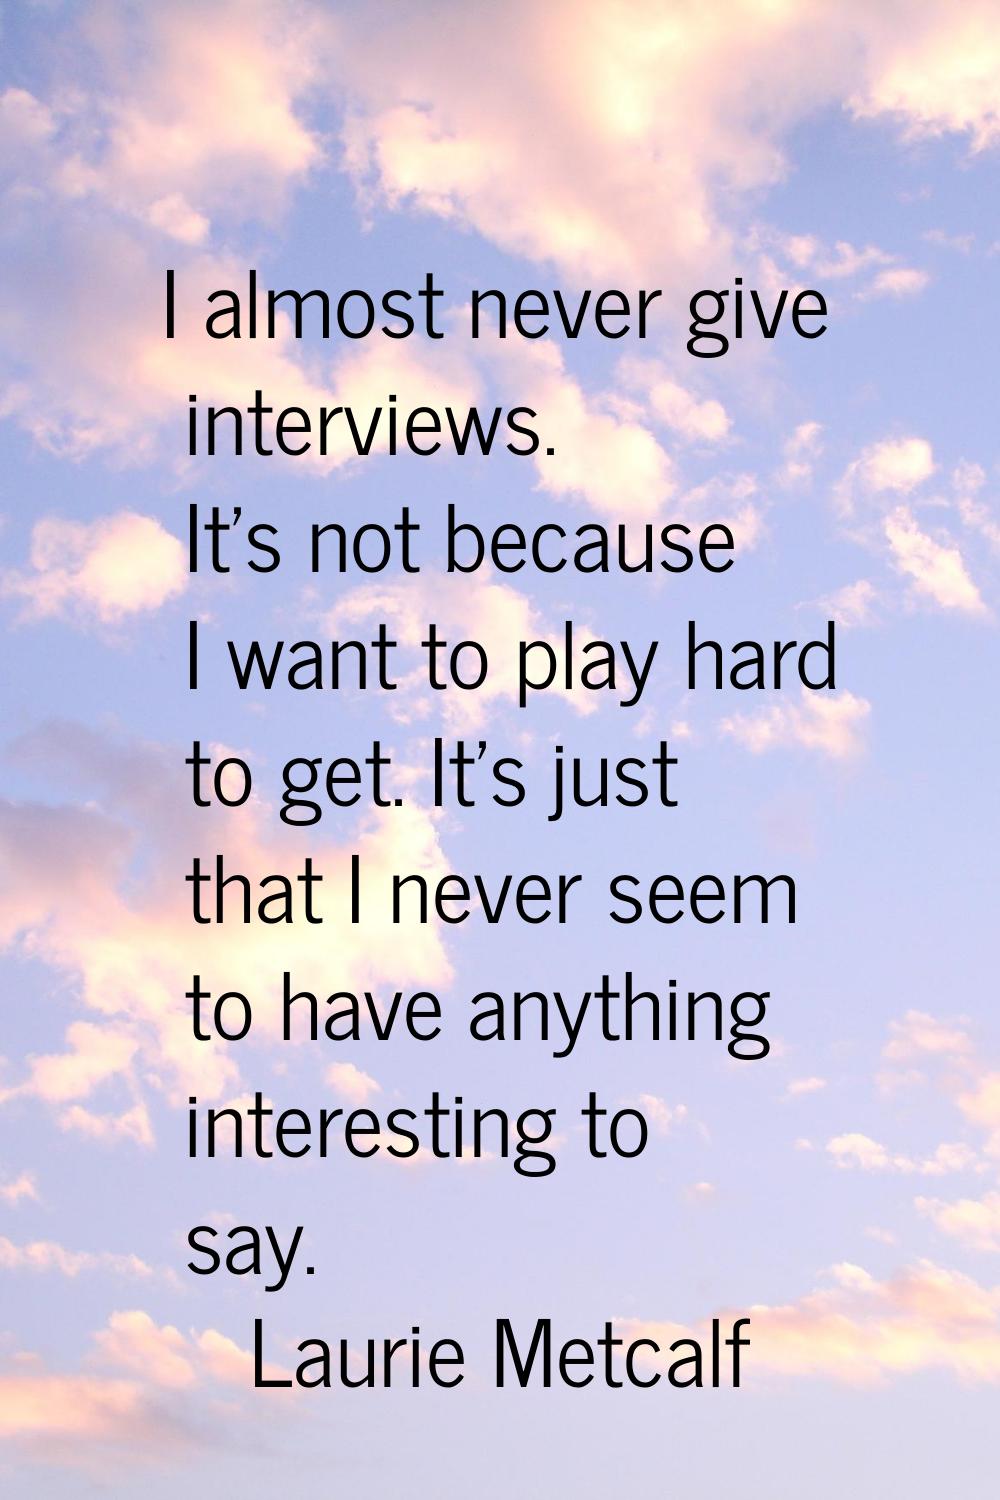 I almost never give interviews. It's not because I want to play hard to get. It's just that I never